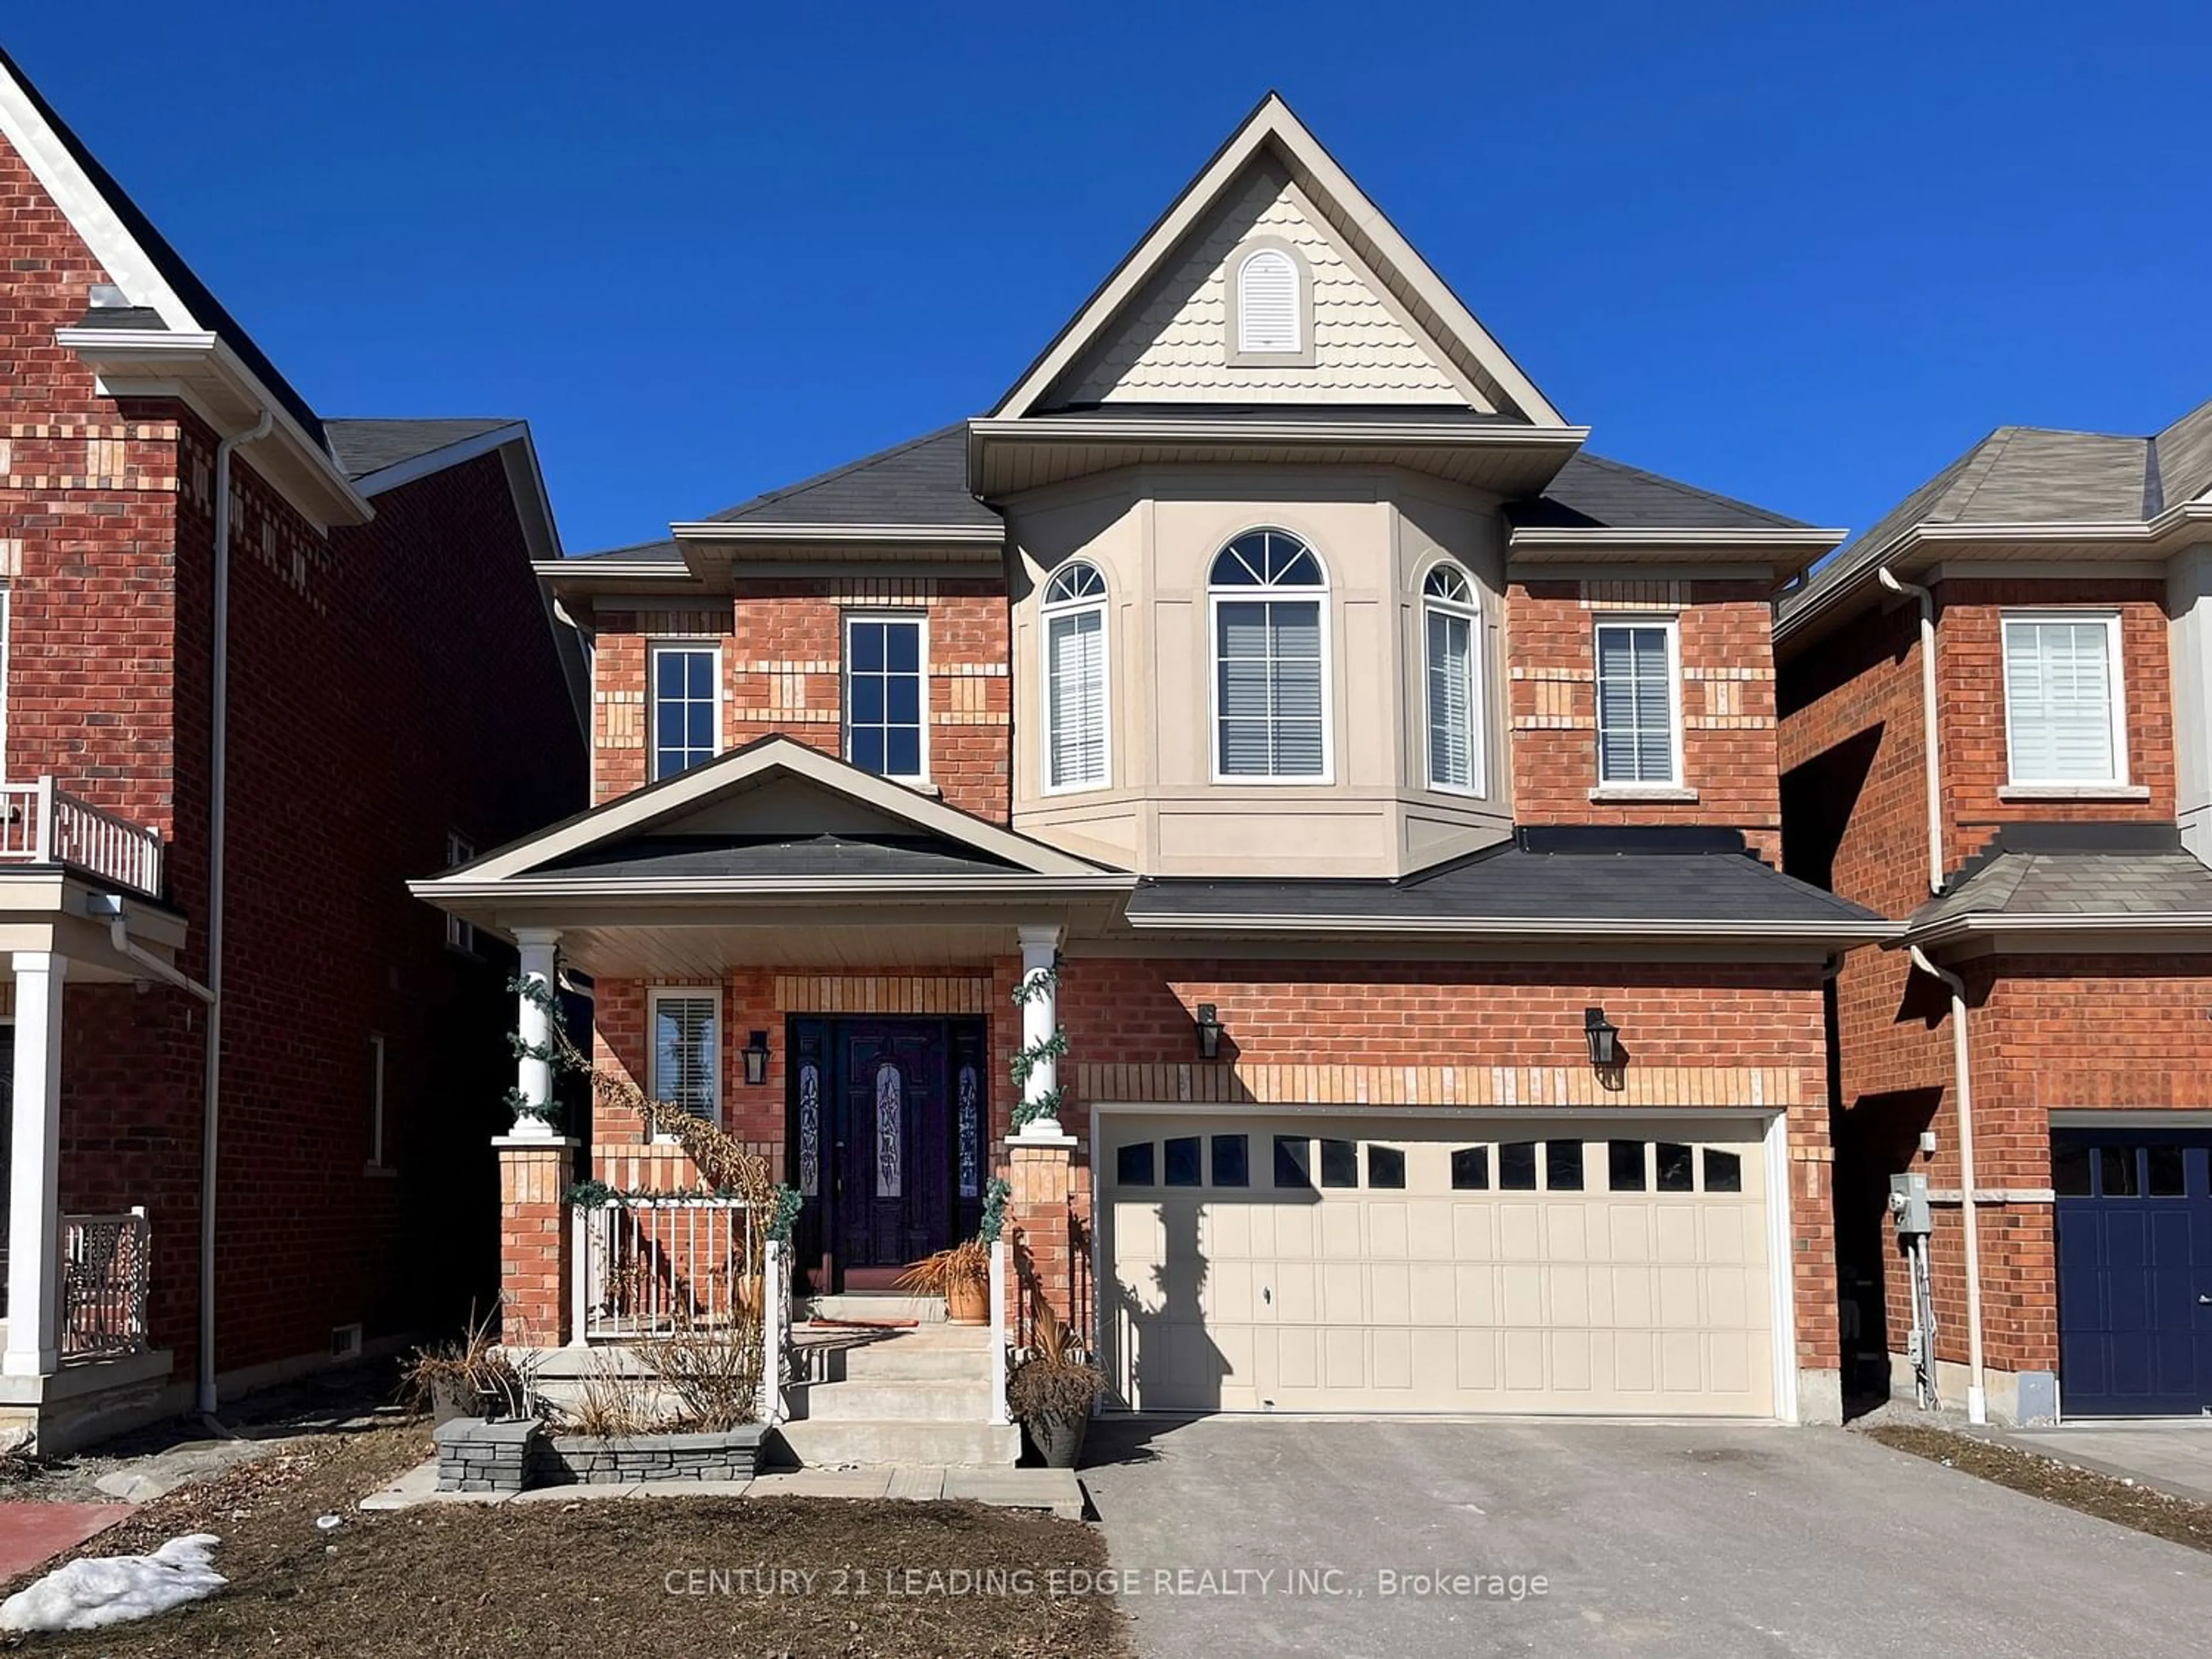 Home with brick exterior material for 228 Greenwood Rd, Whitchurch-Stouffville Ontario L4A 4N7